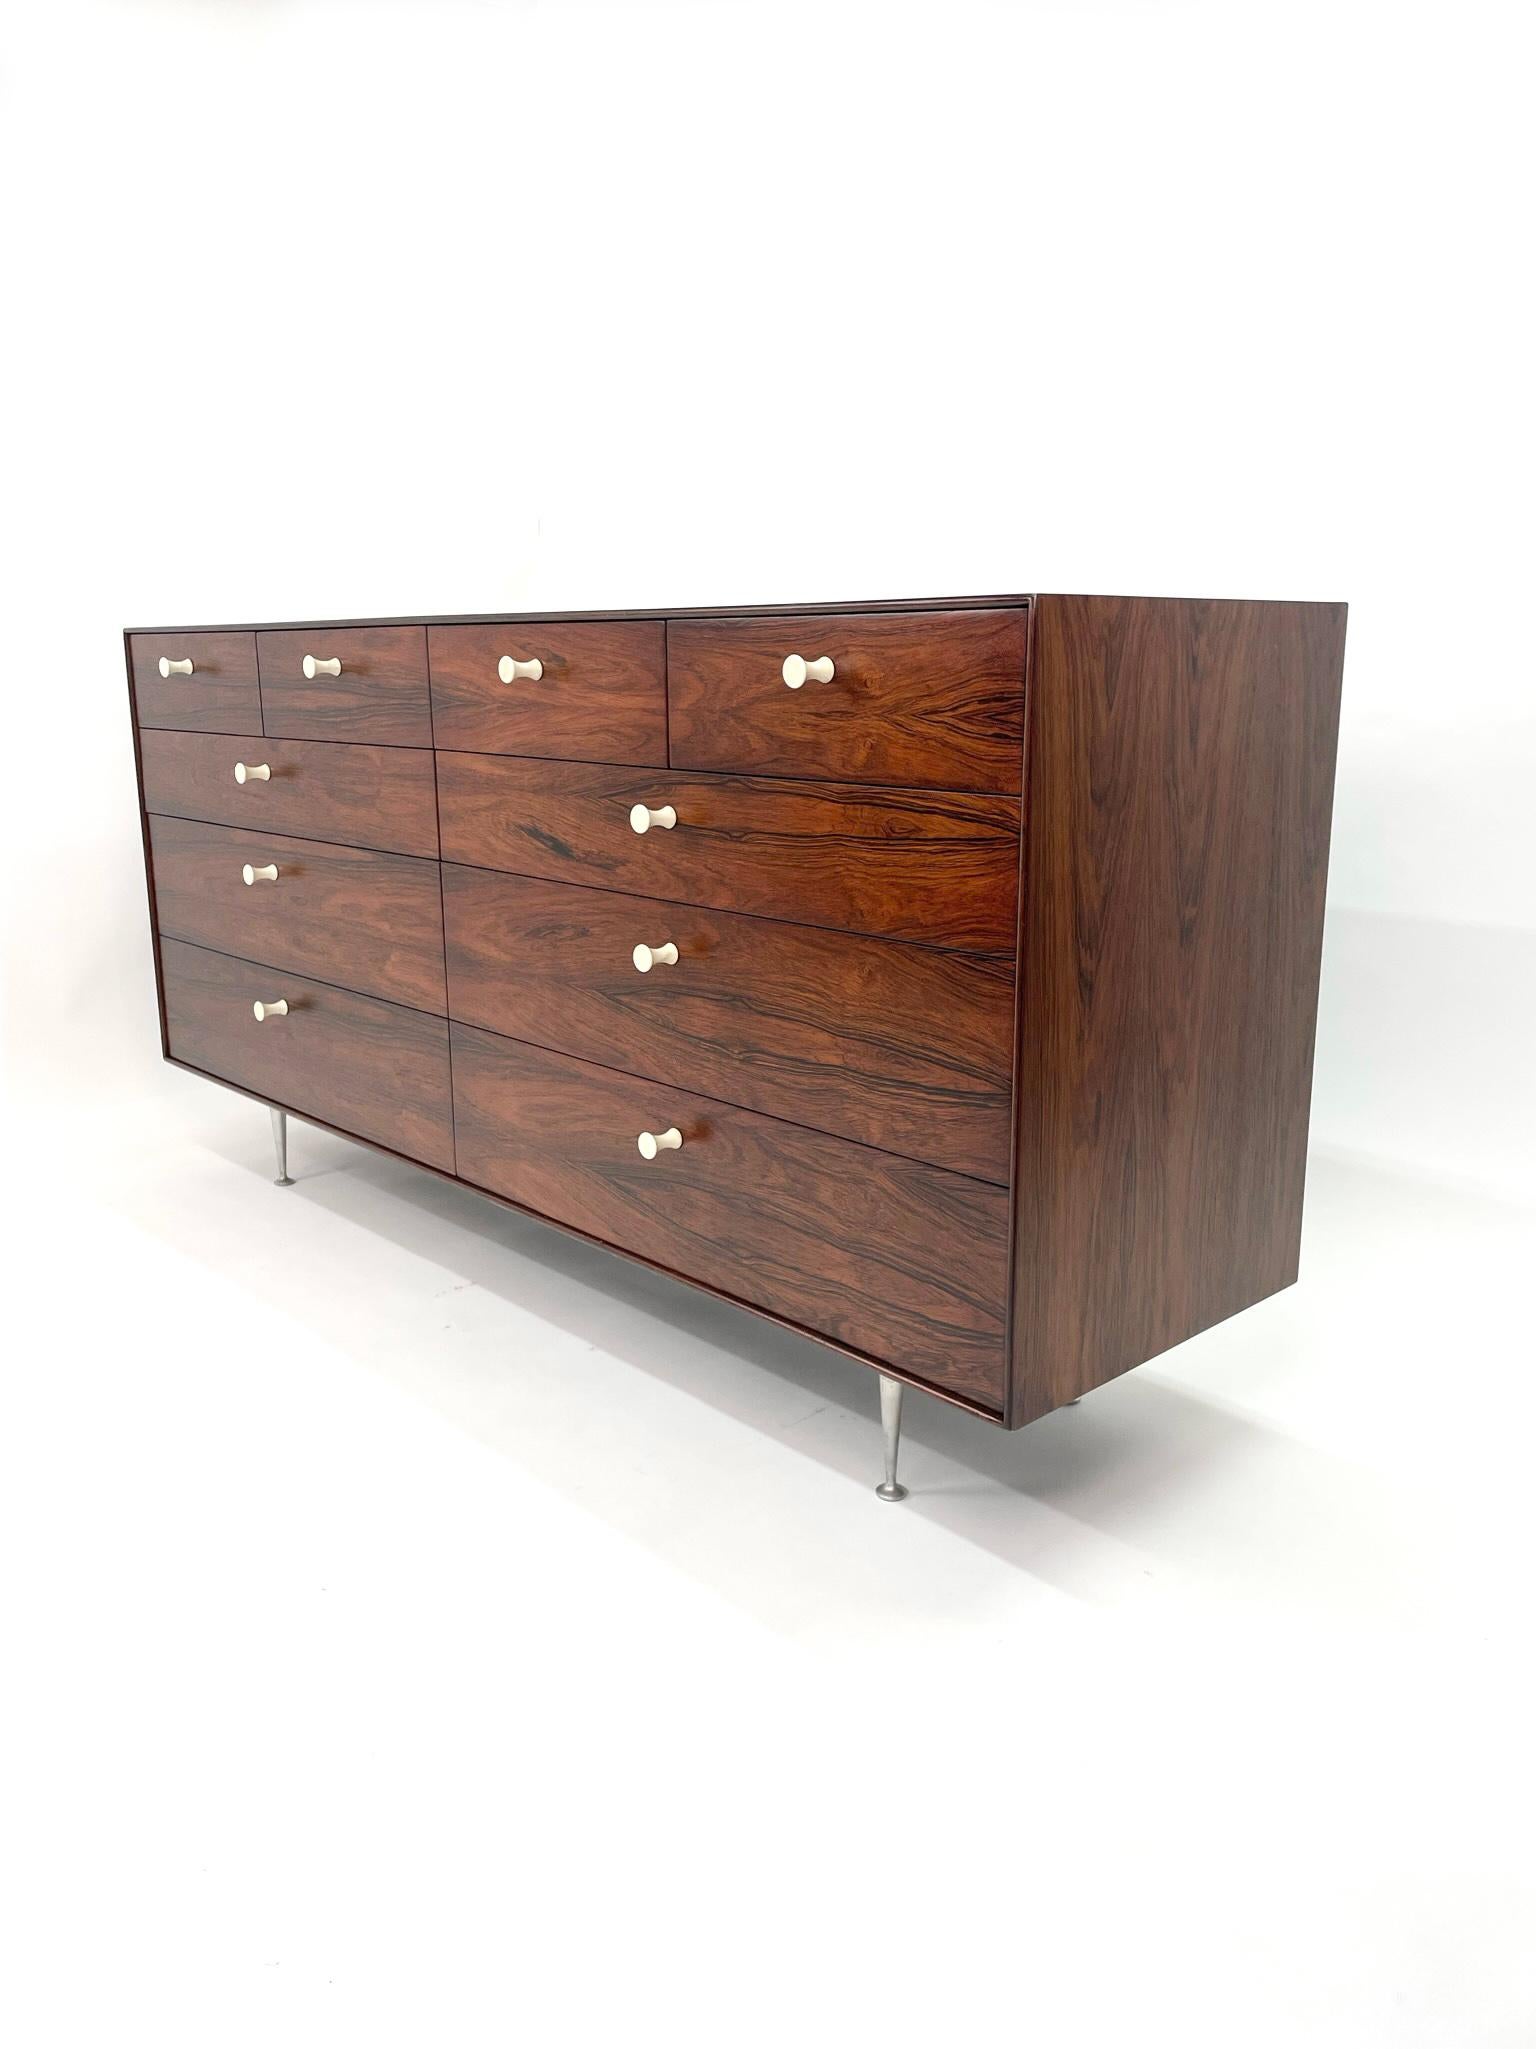 George Nelson Rosewood Thin Edge Double Dresser for Herman Miller. Newly refinished 10 drawer rosewood dresser with white coated aluminum pulls on tapered aluminum legs. The front of the drawers feature book matched grain across the front given a